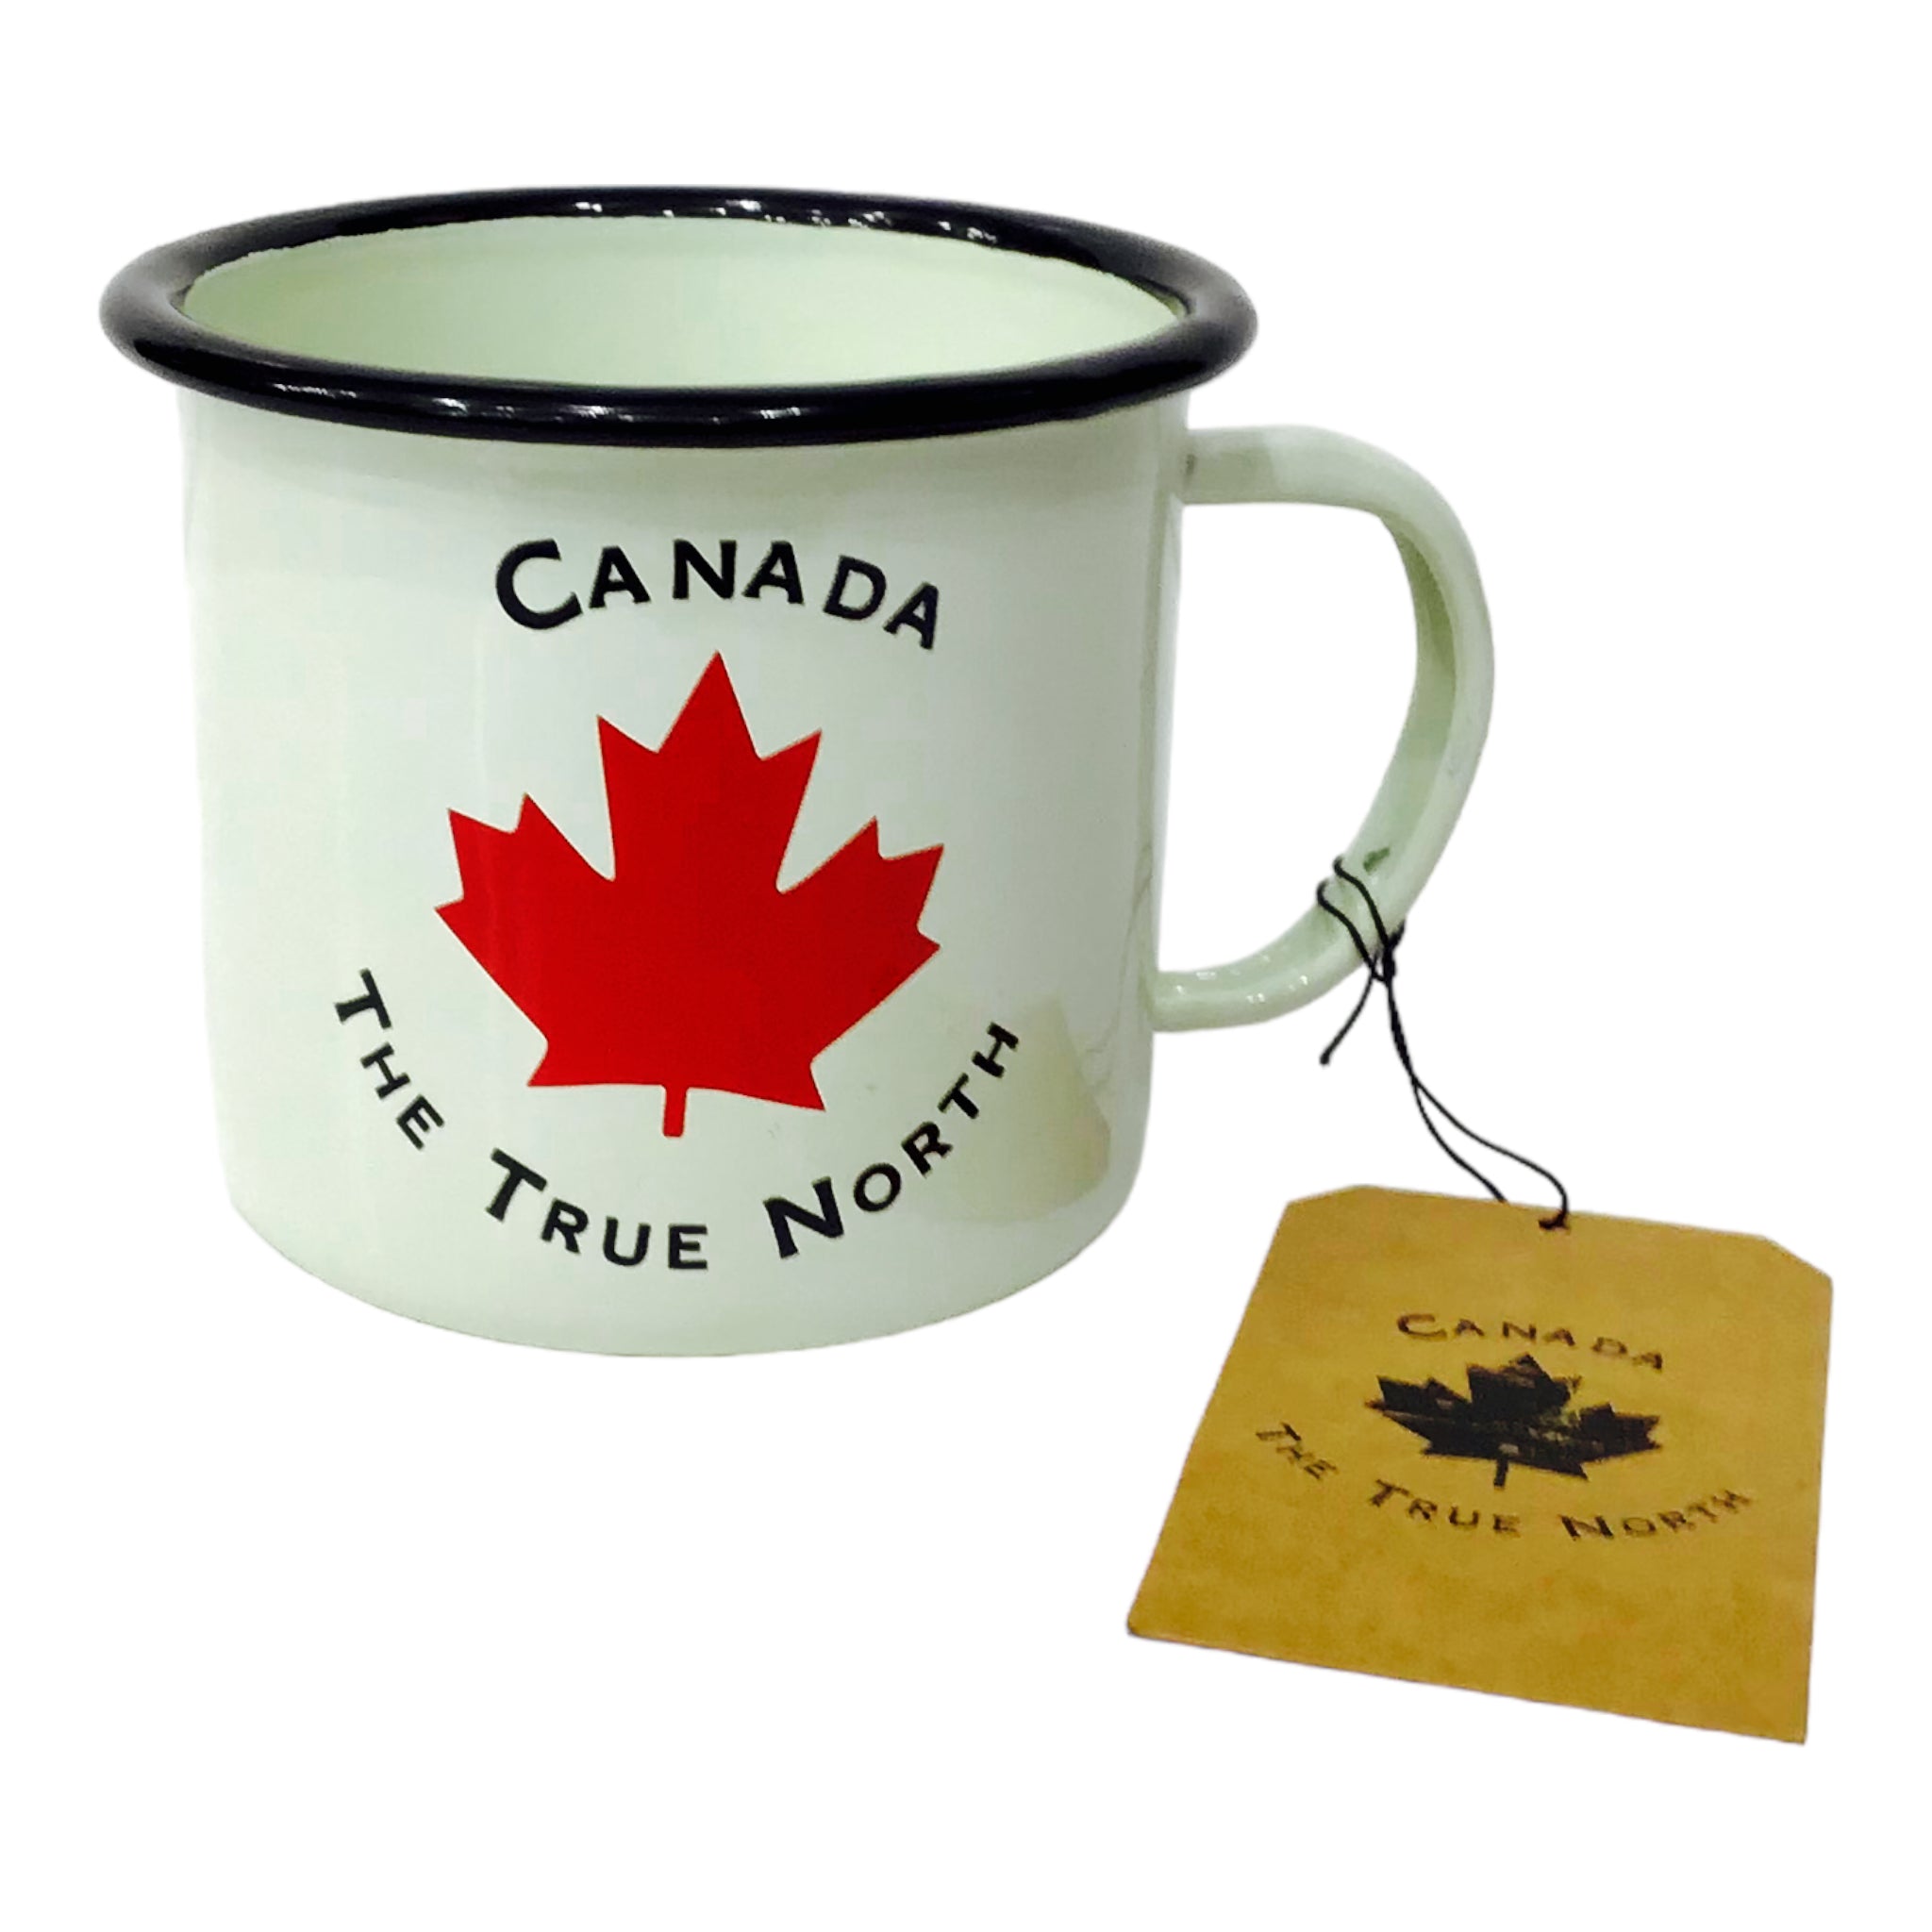 TIN COFFEE MUG - RED MAPLE LEAF ON OFF-WHITE TRAVEL PICNIC AND CAMPING METAL CUP. THE TRUE NORTH CANADA